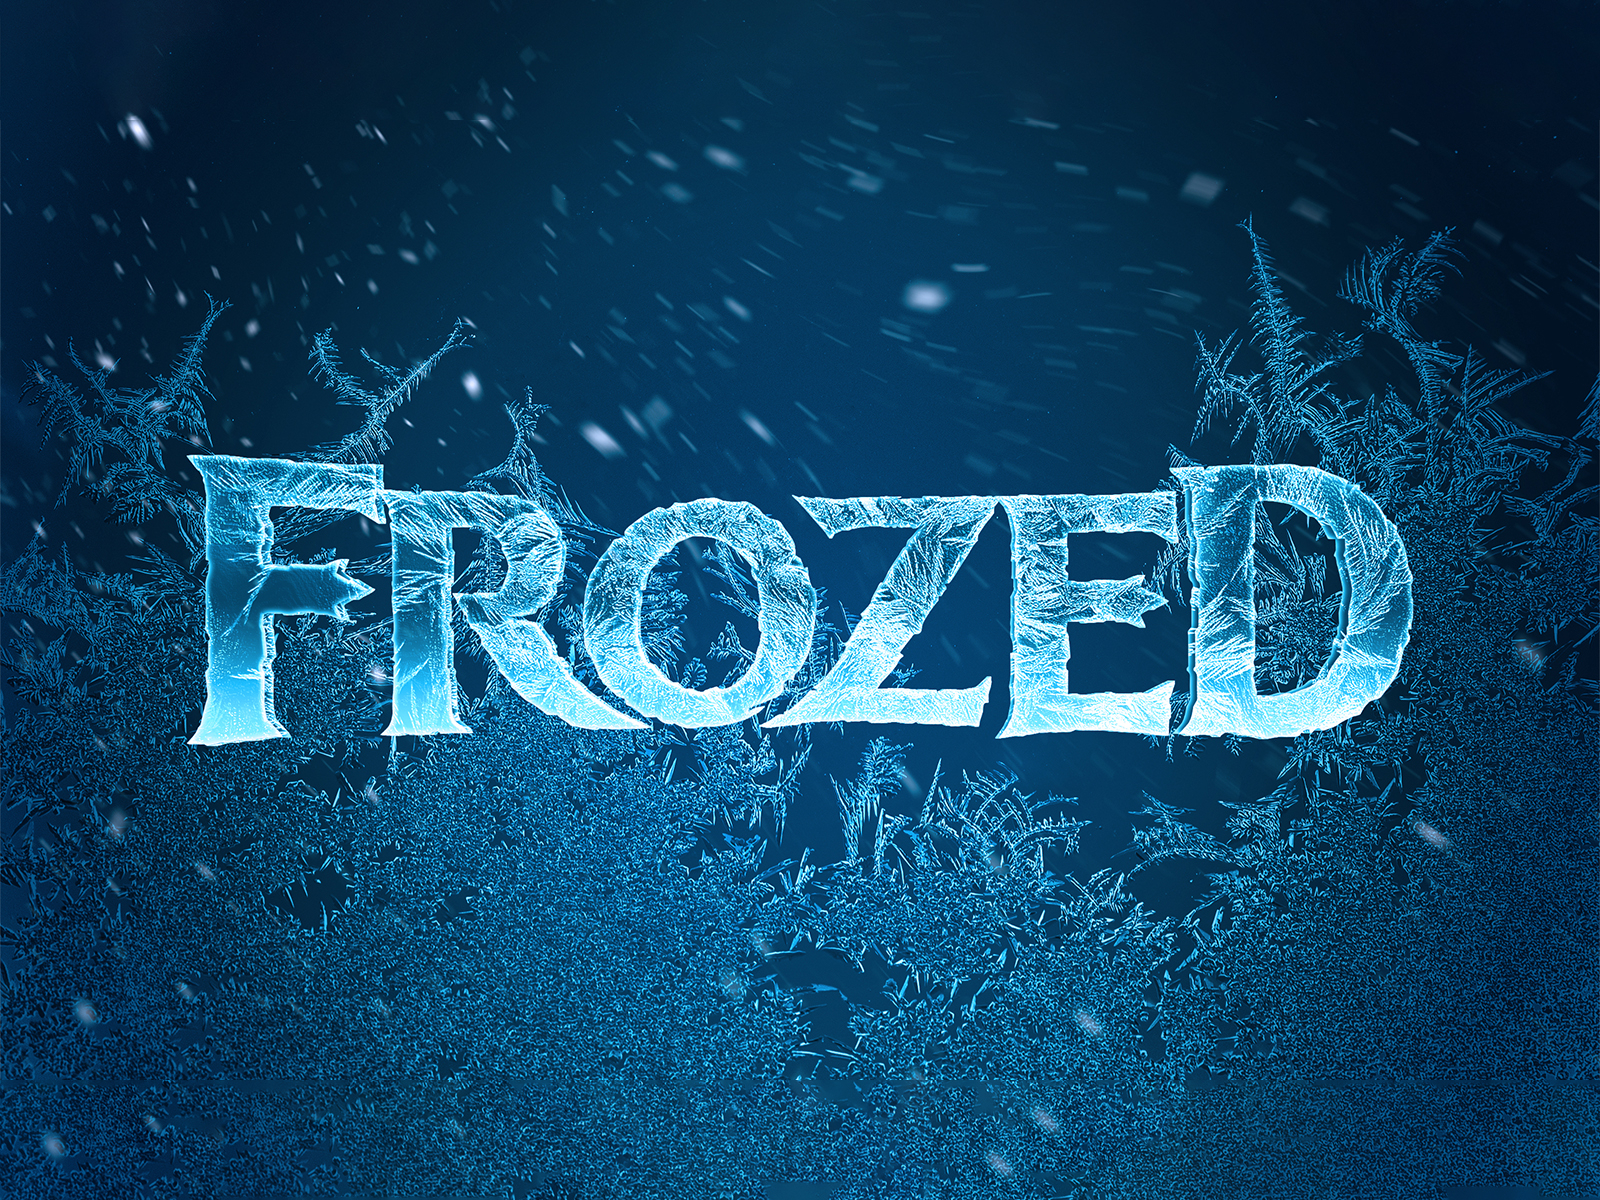 frozen-text-effect-photoshop-template-by-sahin-d-zg-n-on-dribbble